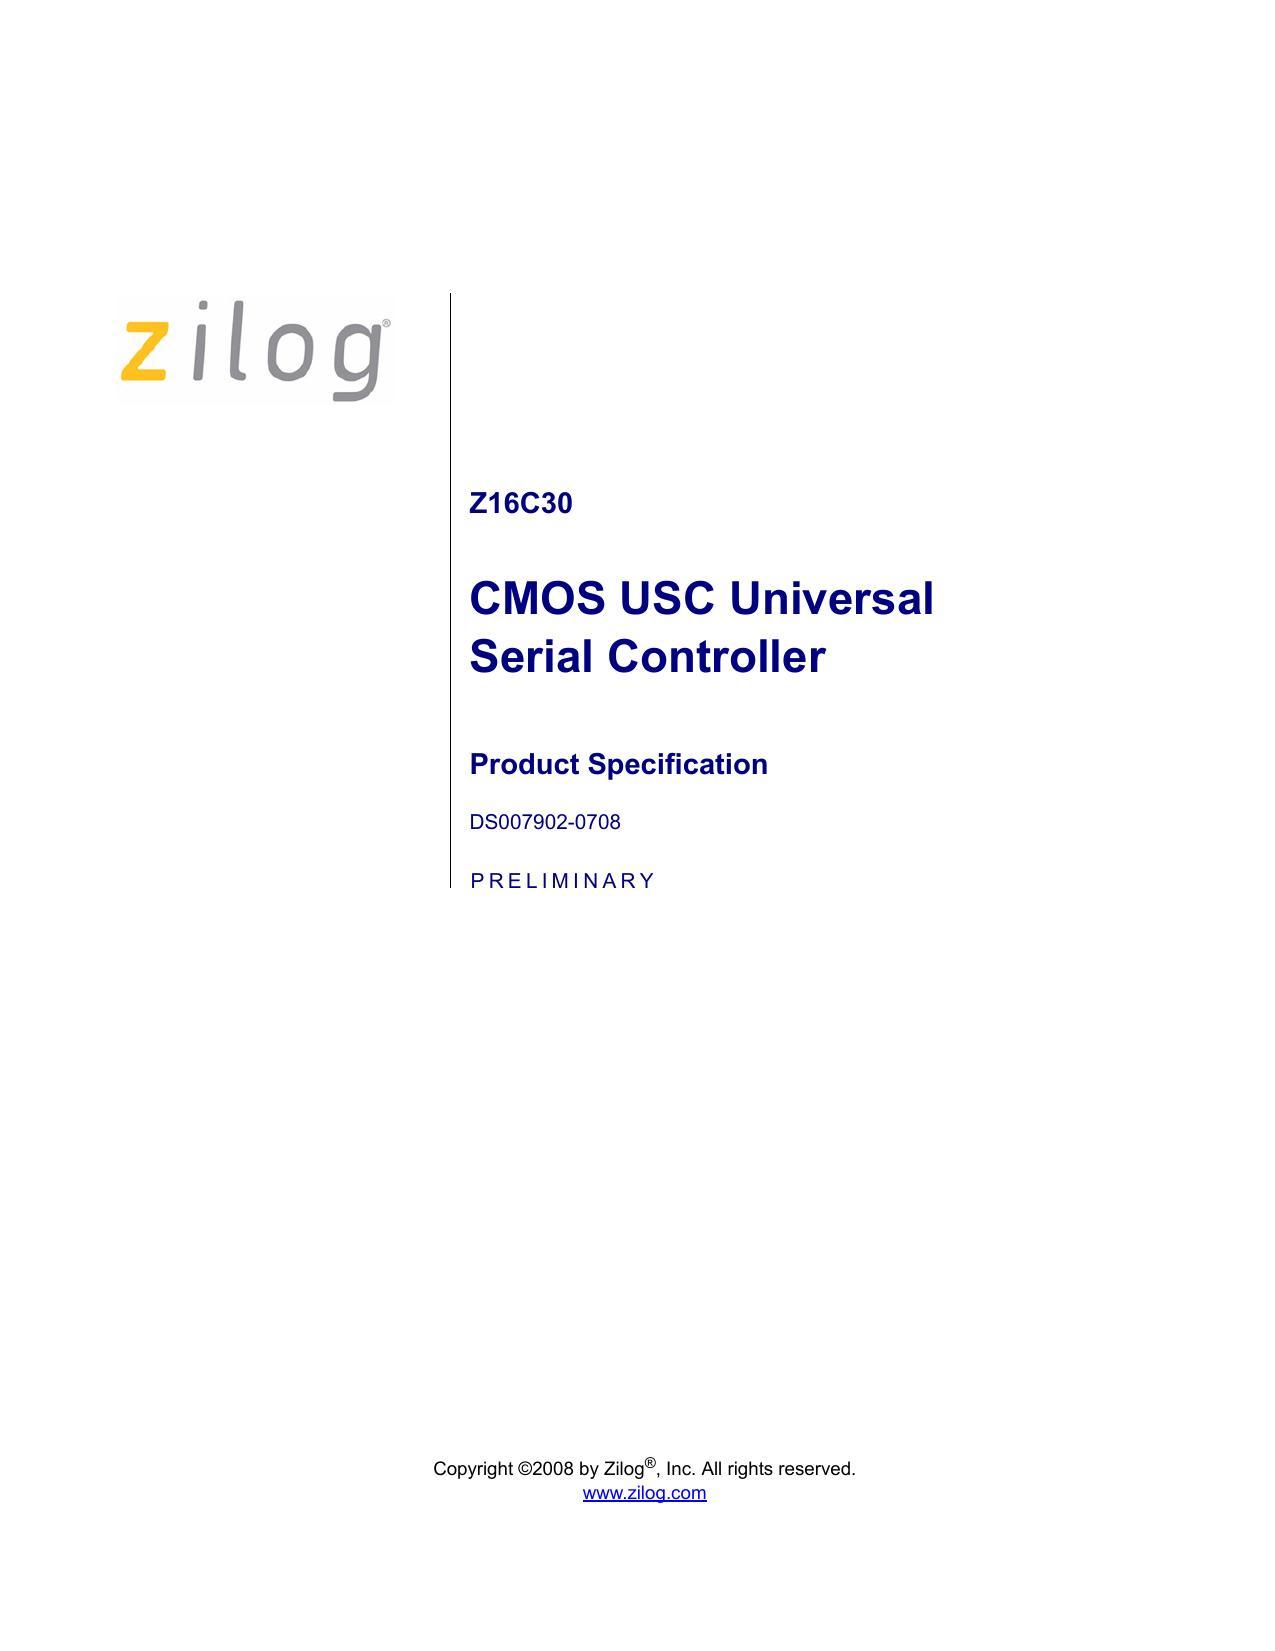 zilog-216c30-cmos-usc-universal-serial-controller-product-specification.pdf